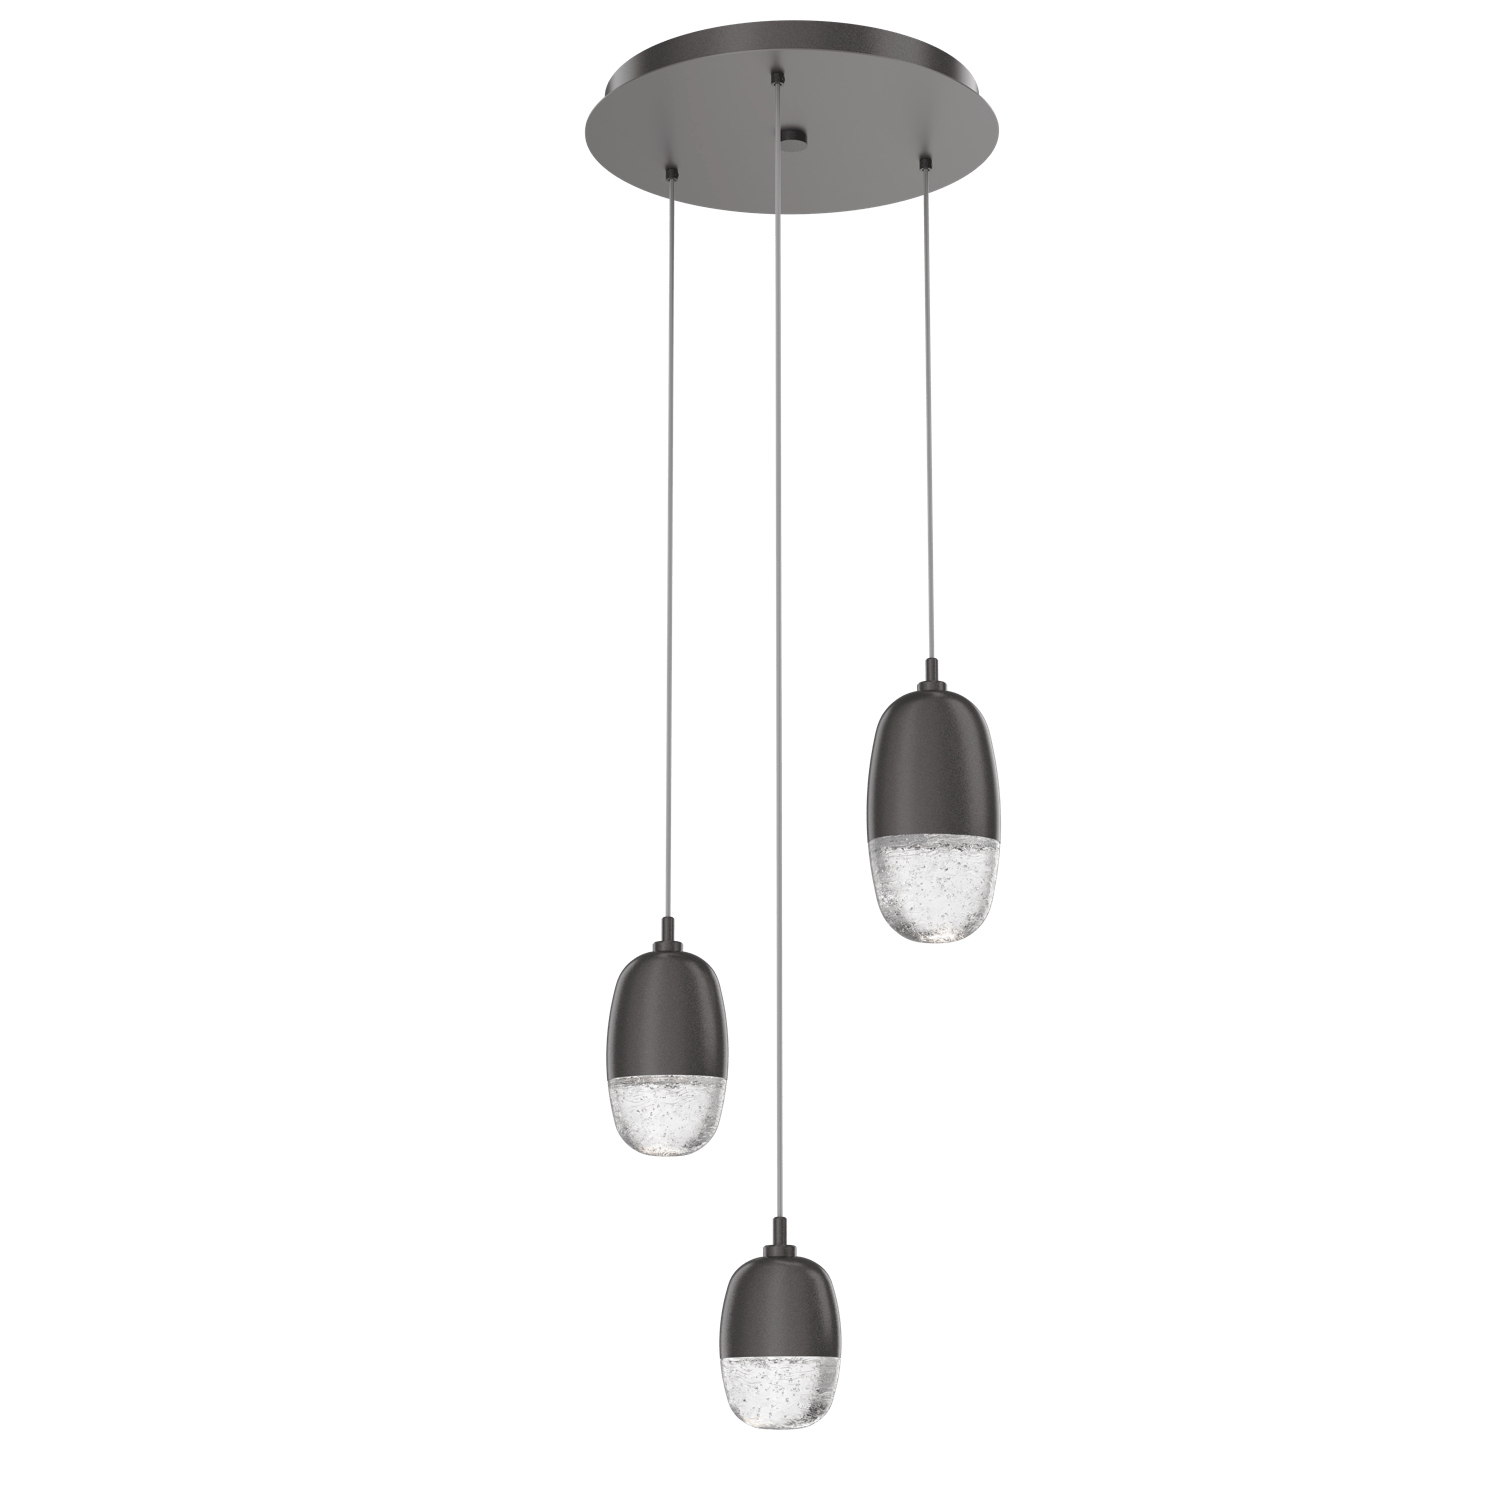 CHB0079-03-GP-Hammerton-Studio-Pebble-3-light-round-pendant-chandelier-with-graphite-finish-and-clear-cast-glass-shades-and-LED-lamping